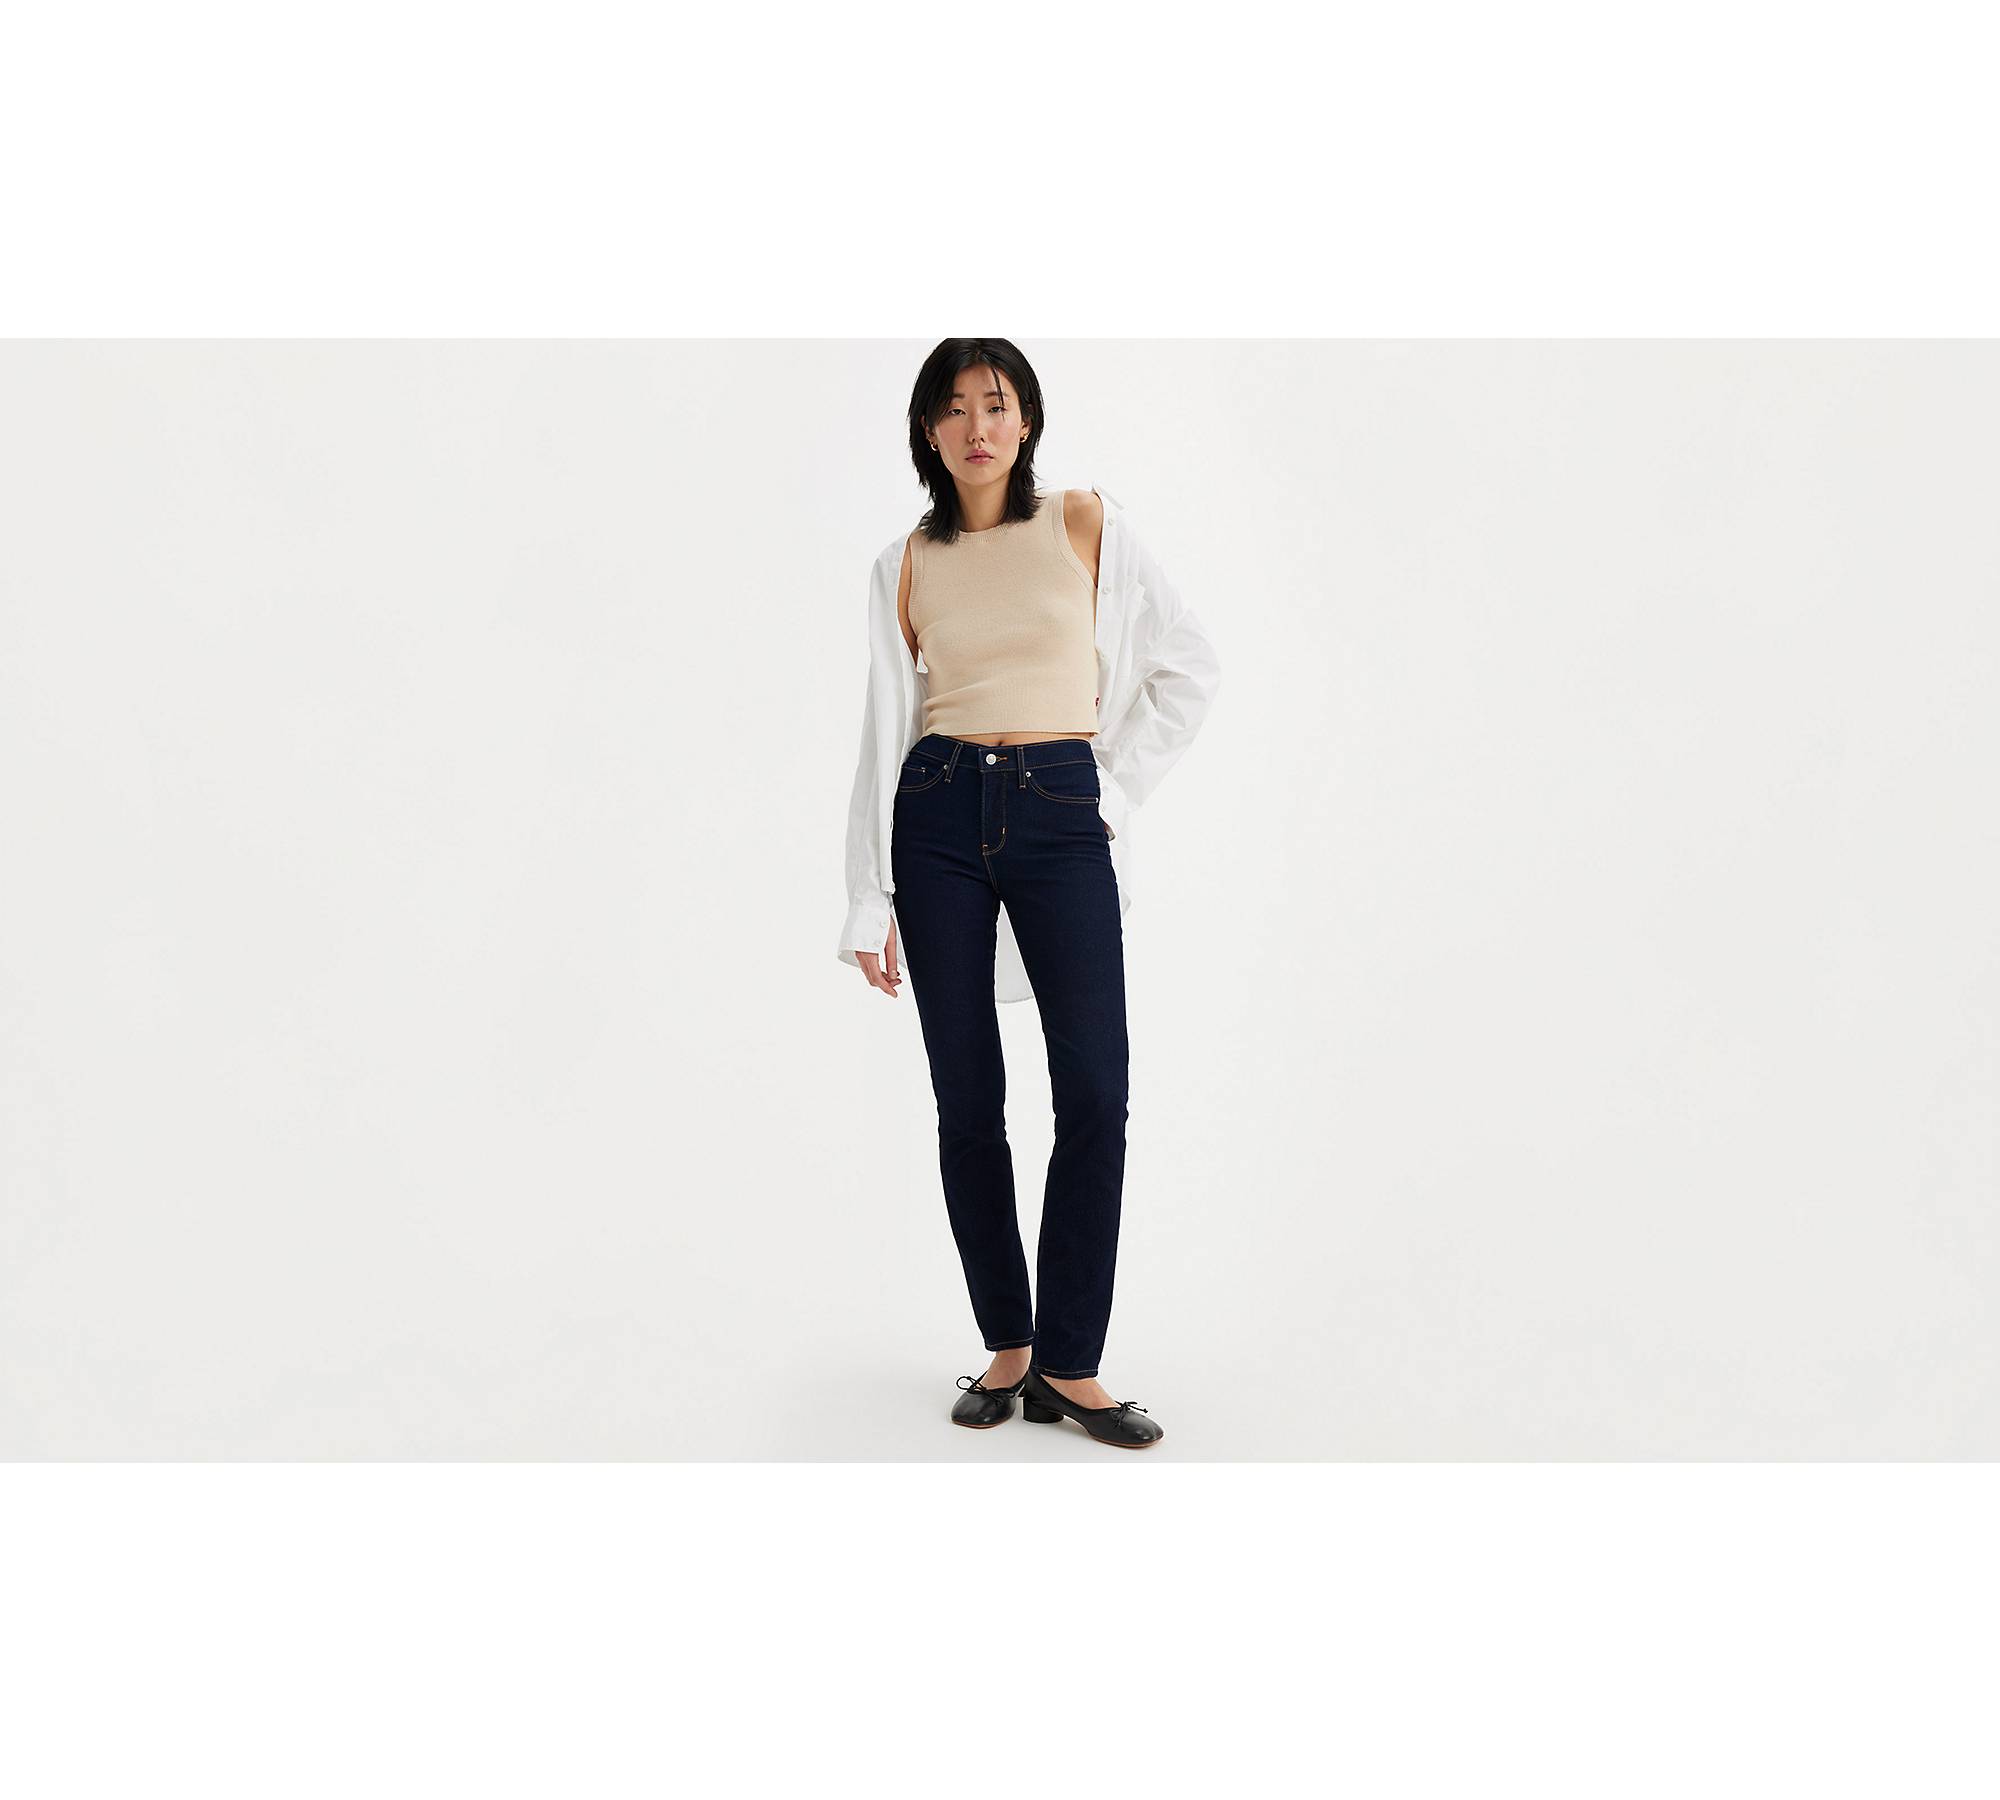 Levi's Jeans for Women